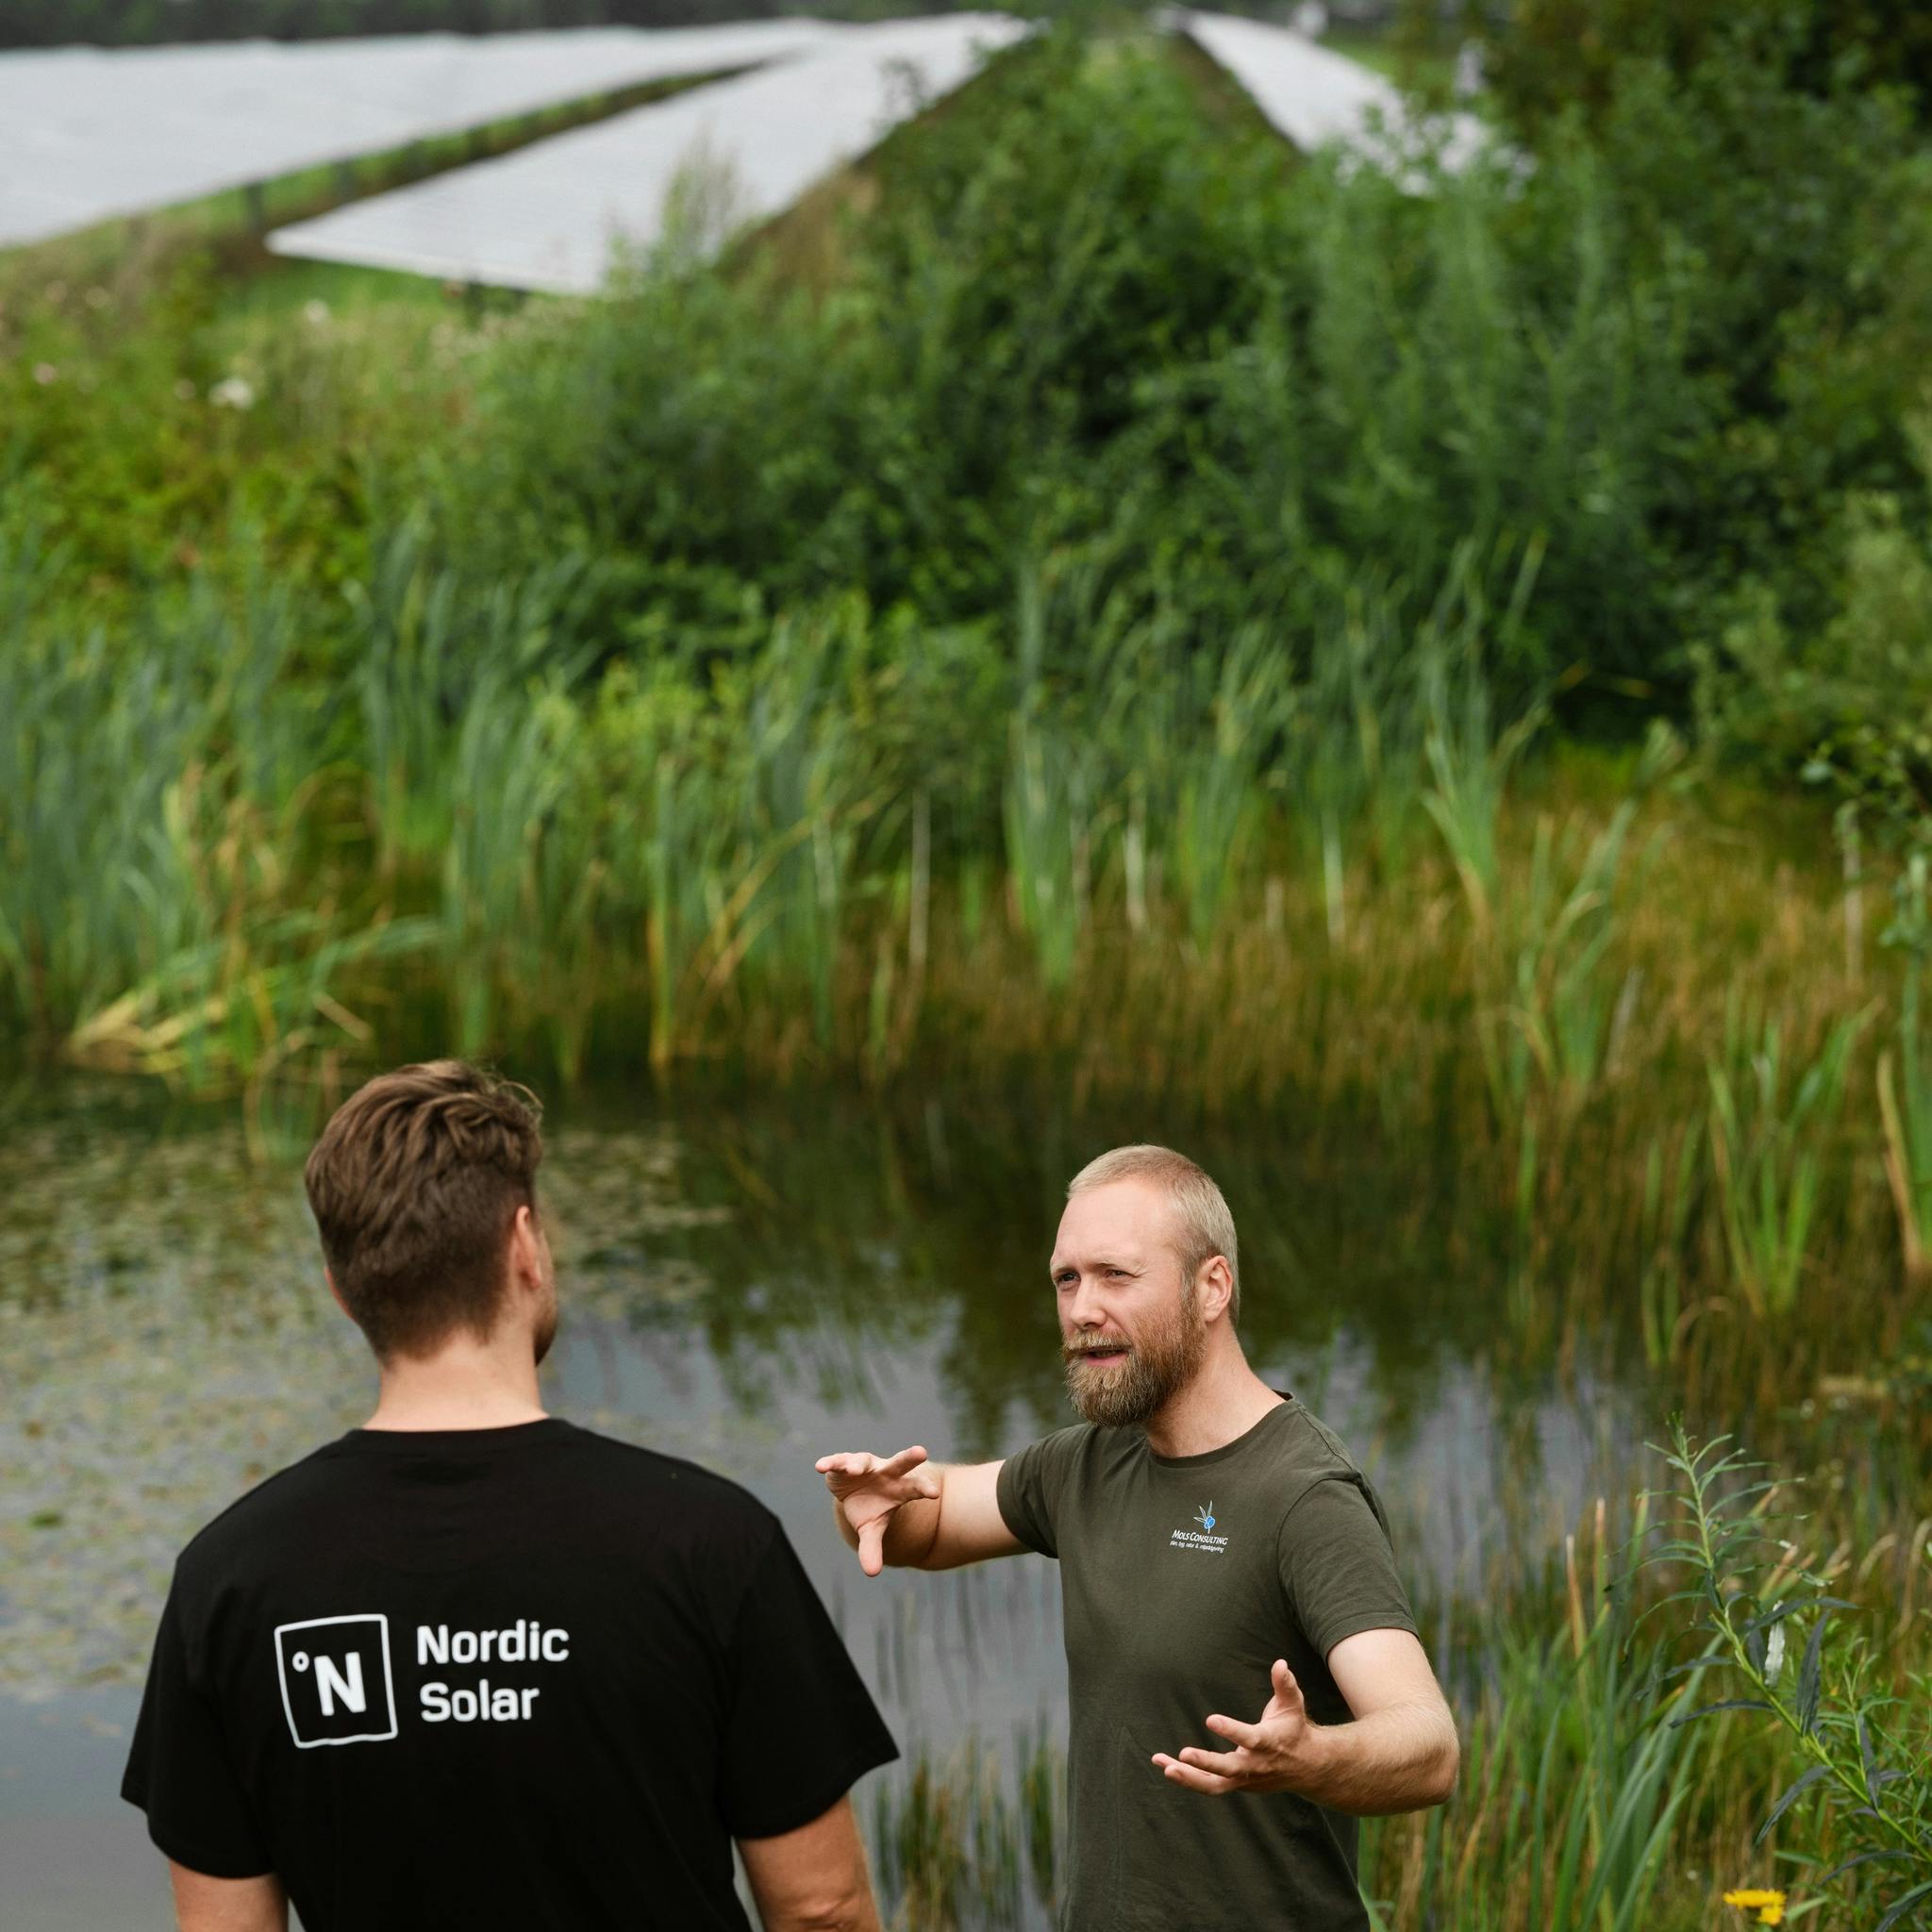 Lasse from Mols Consulting by pond in solar park